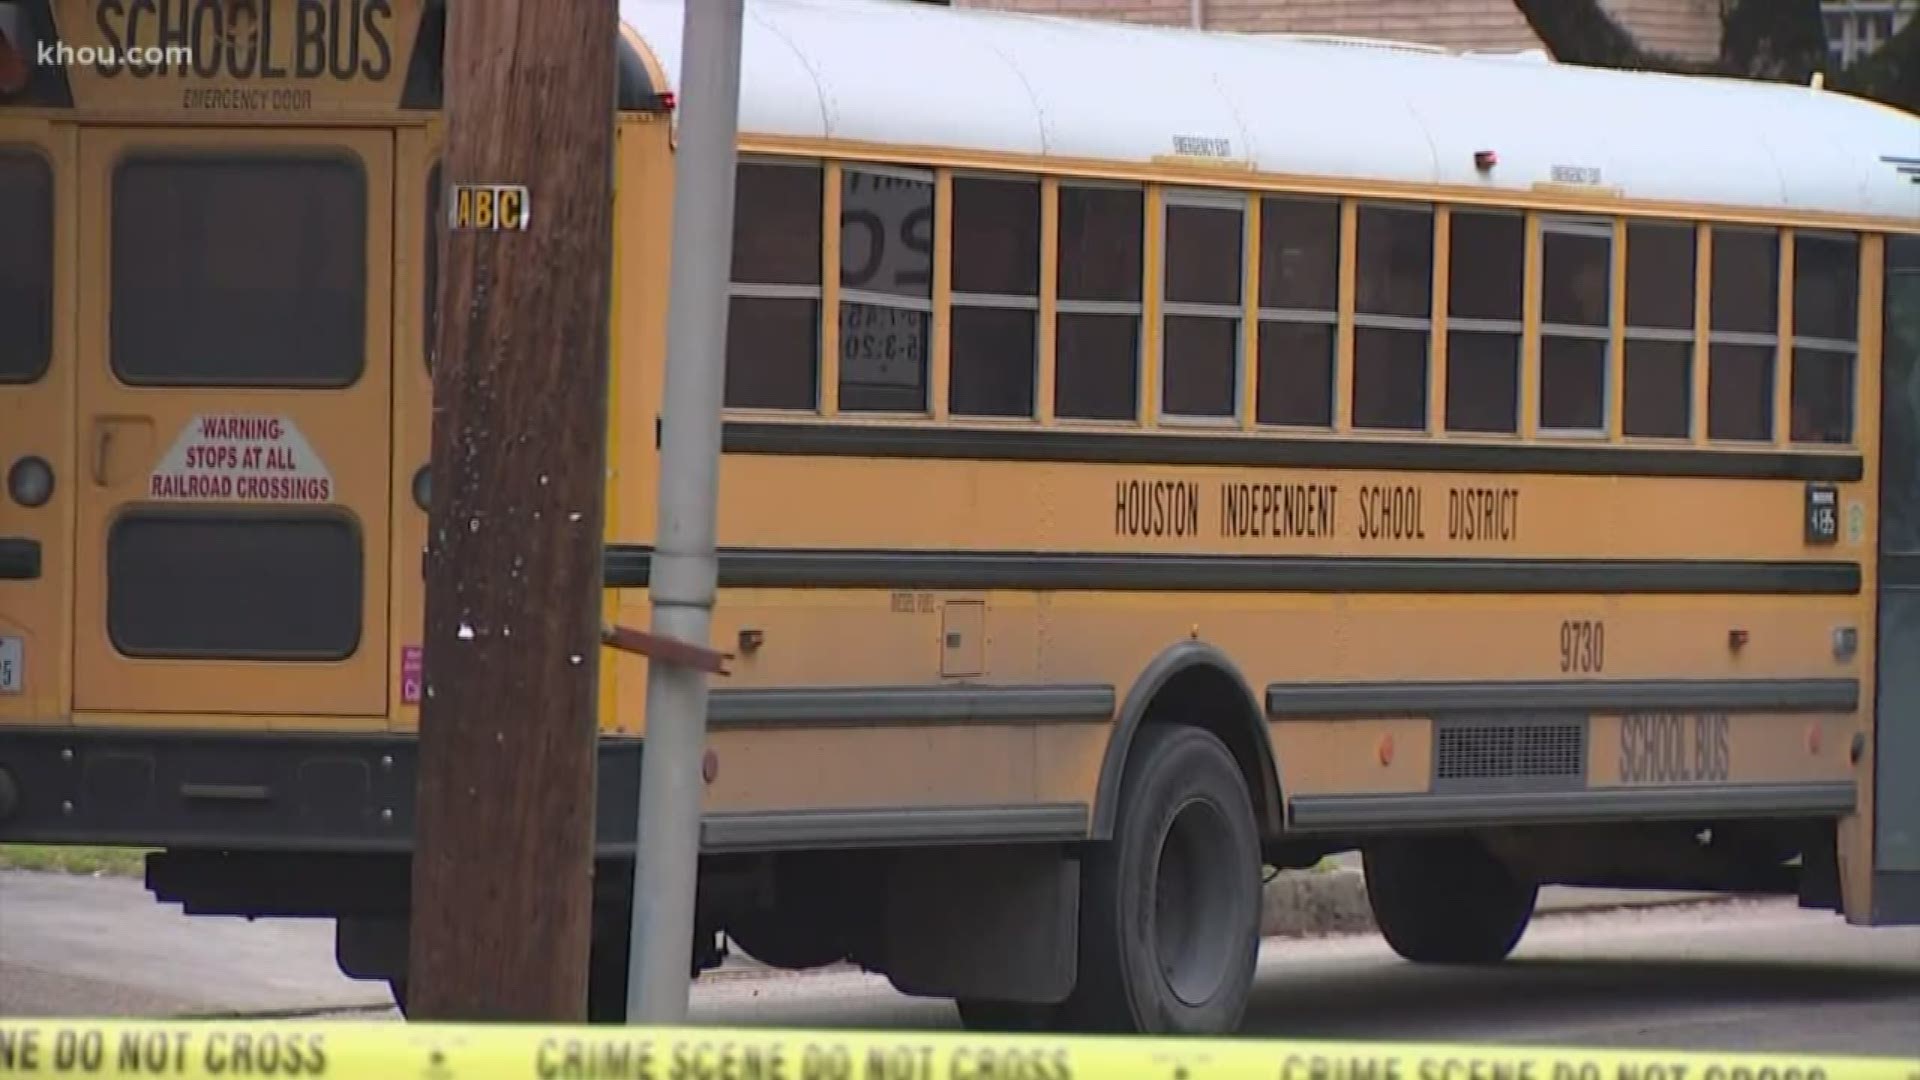 A man has died after he was hit by a school bus Thursday in the Heights.